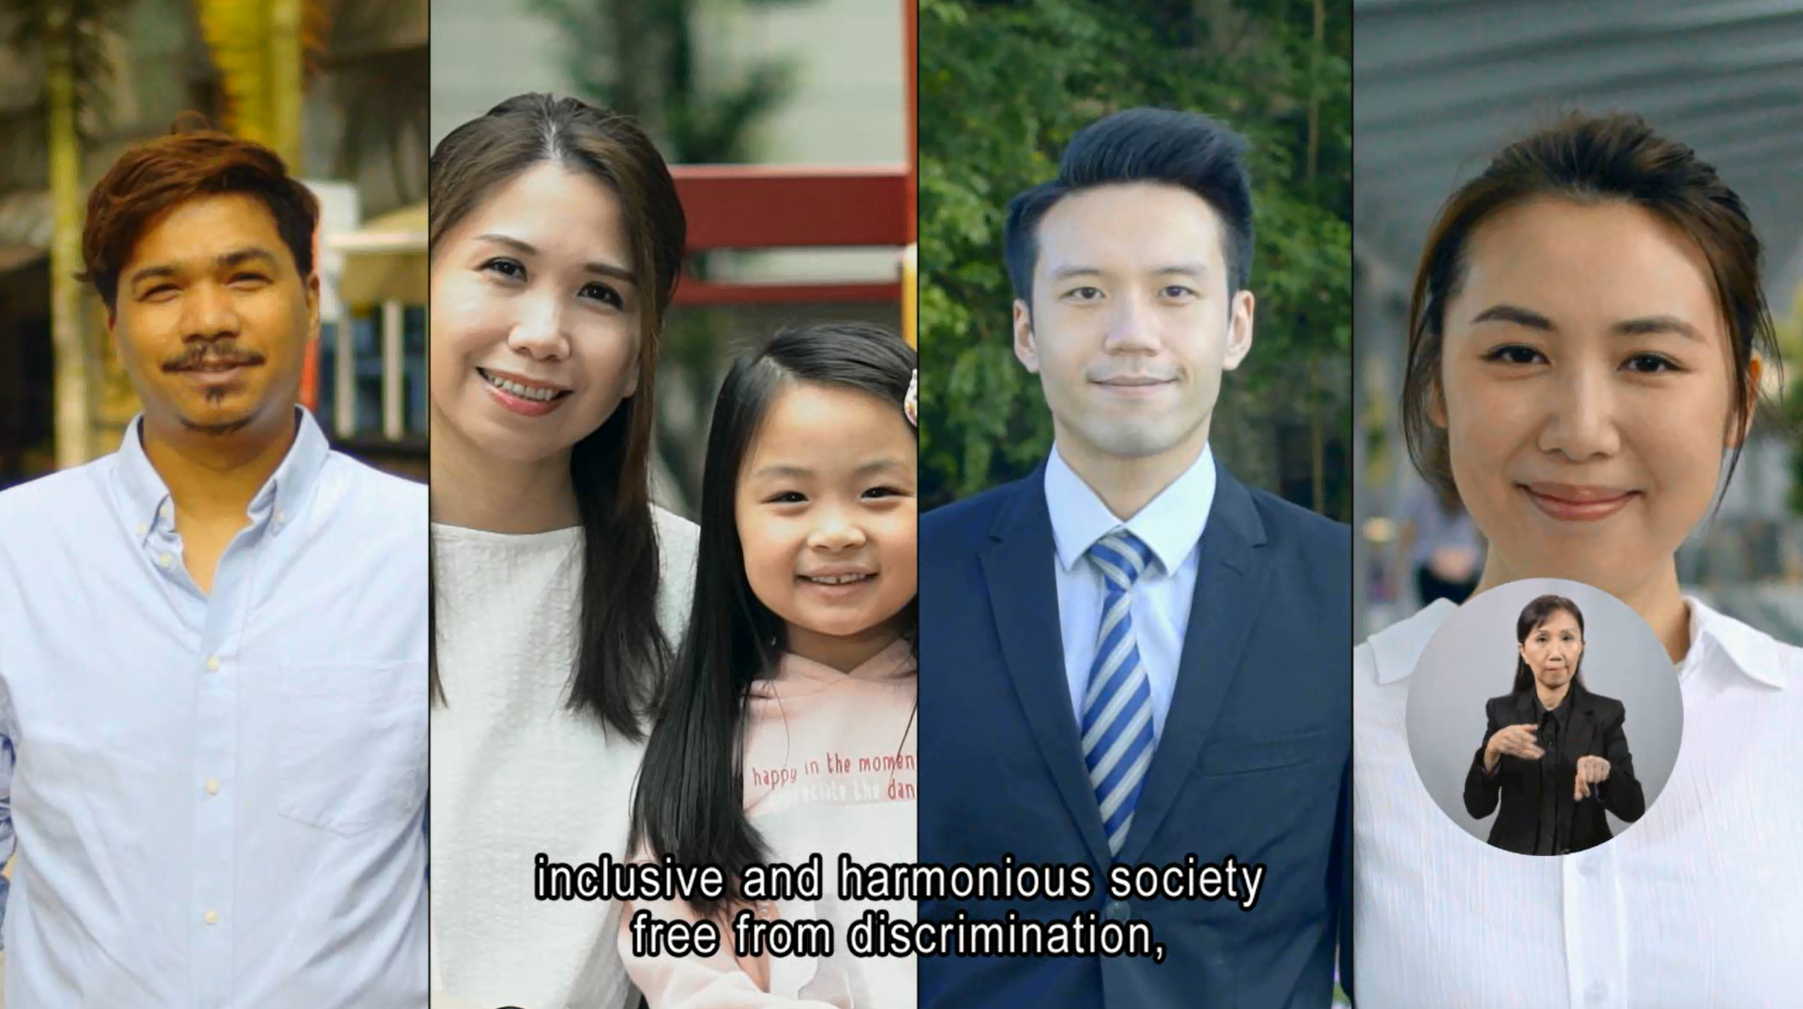 Corporate Video of the Equal Opportunities Commission - Overcoming Barriers to an Inclusive World